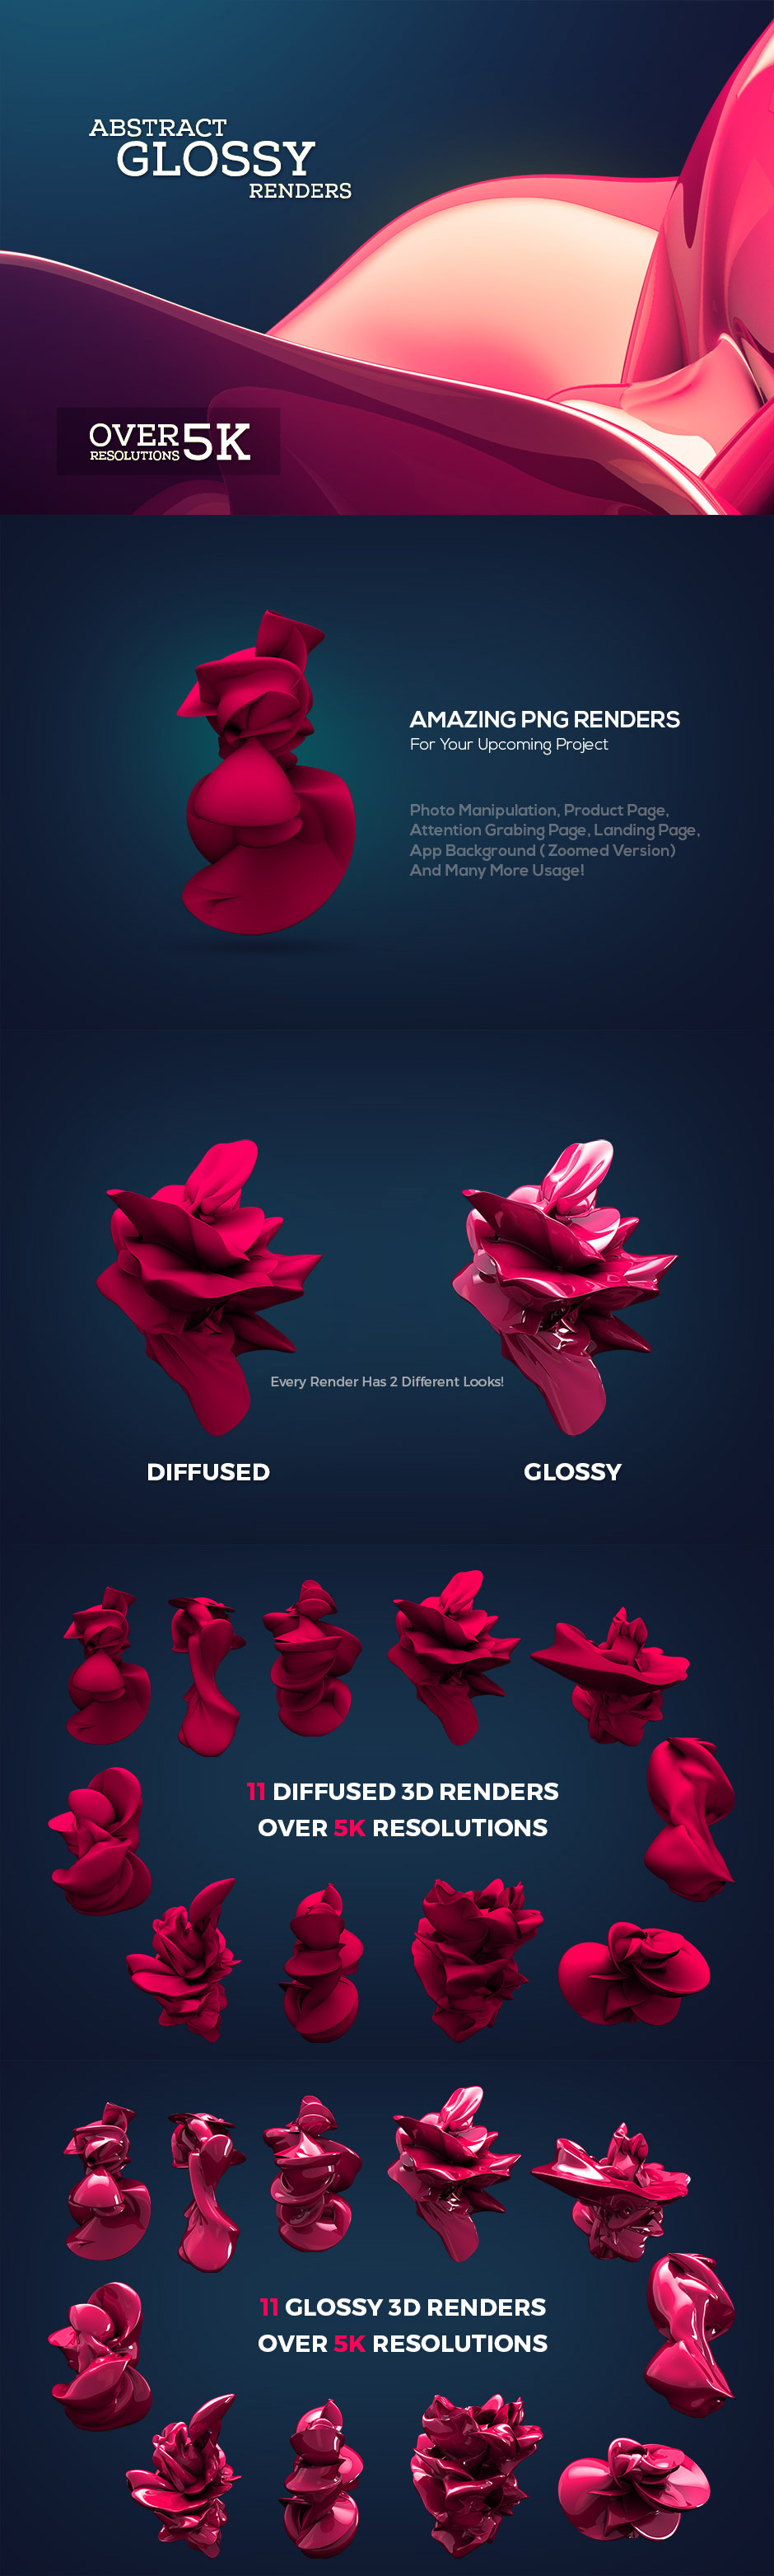 Abstract Glossy 3D Renders - Design Cuts Design Cuts